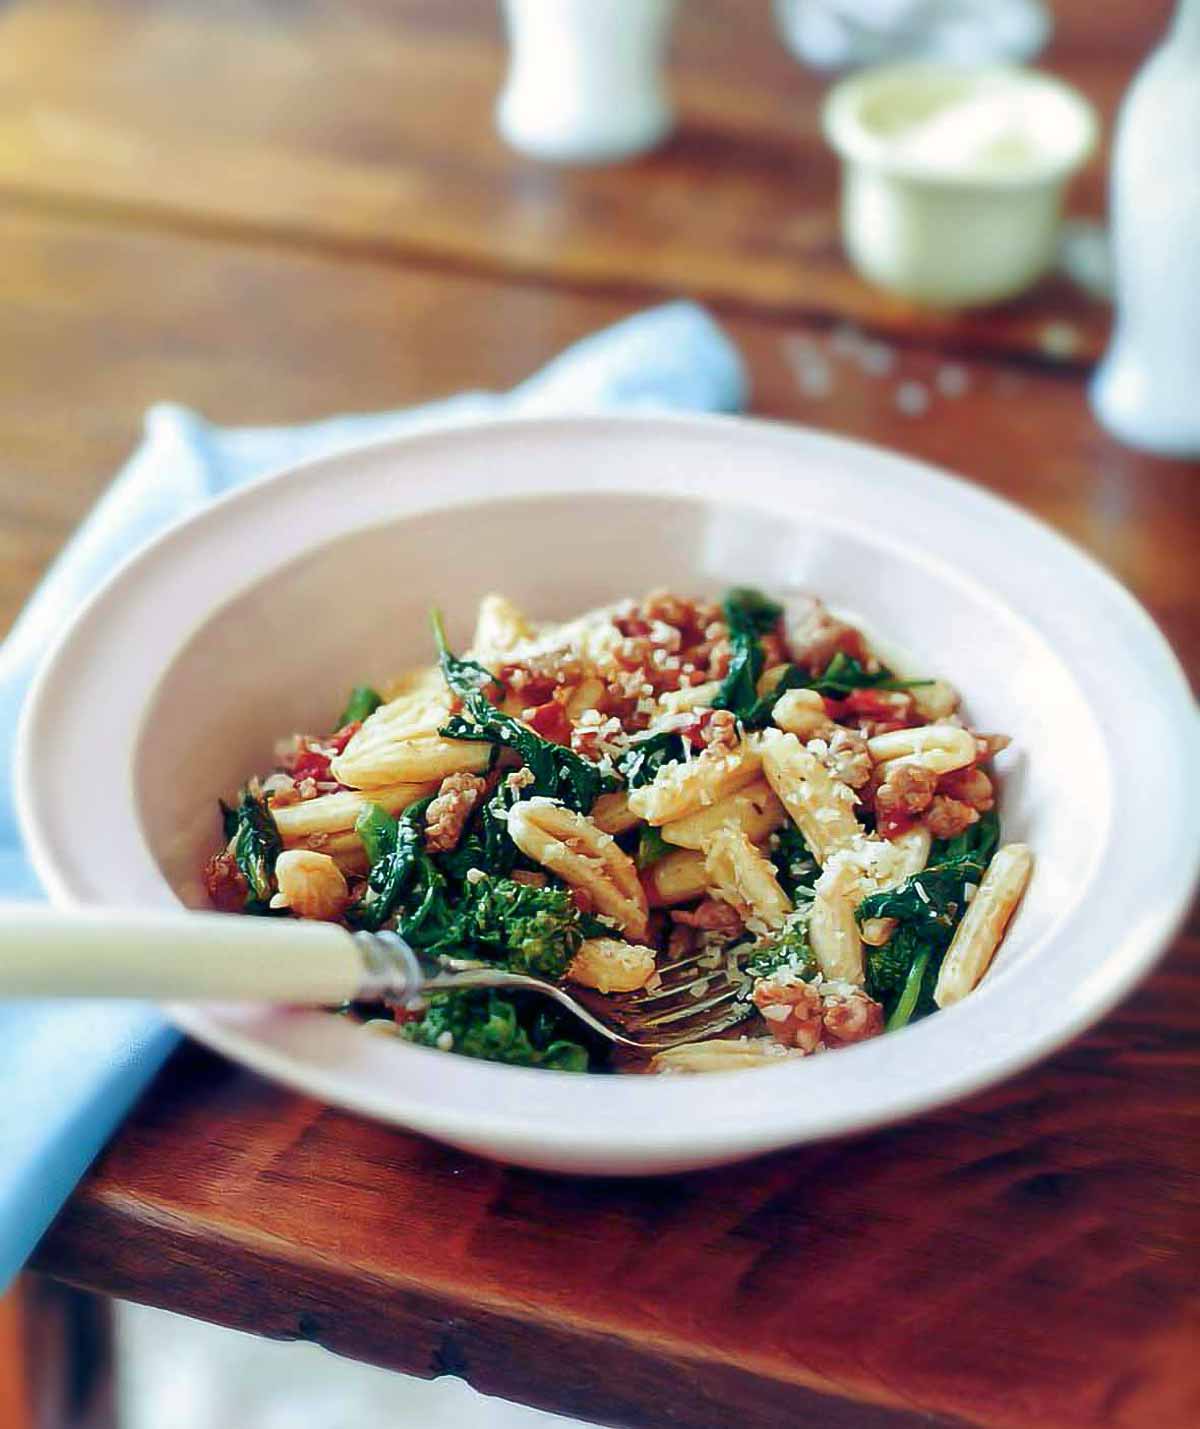 Bowl of cvatelli with turkey sausage, tomato, and broccoli rabe on a table, with a spoon